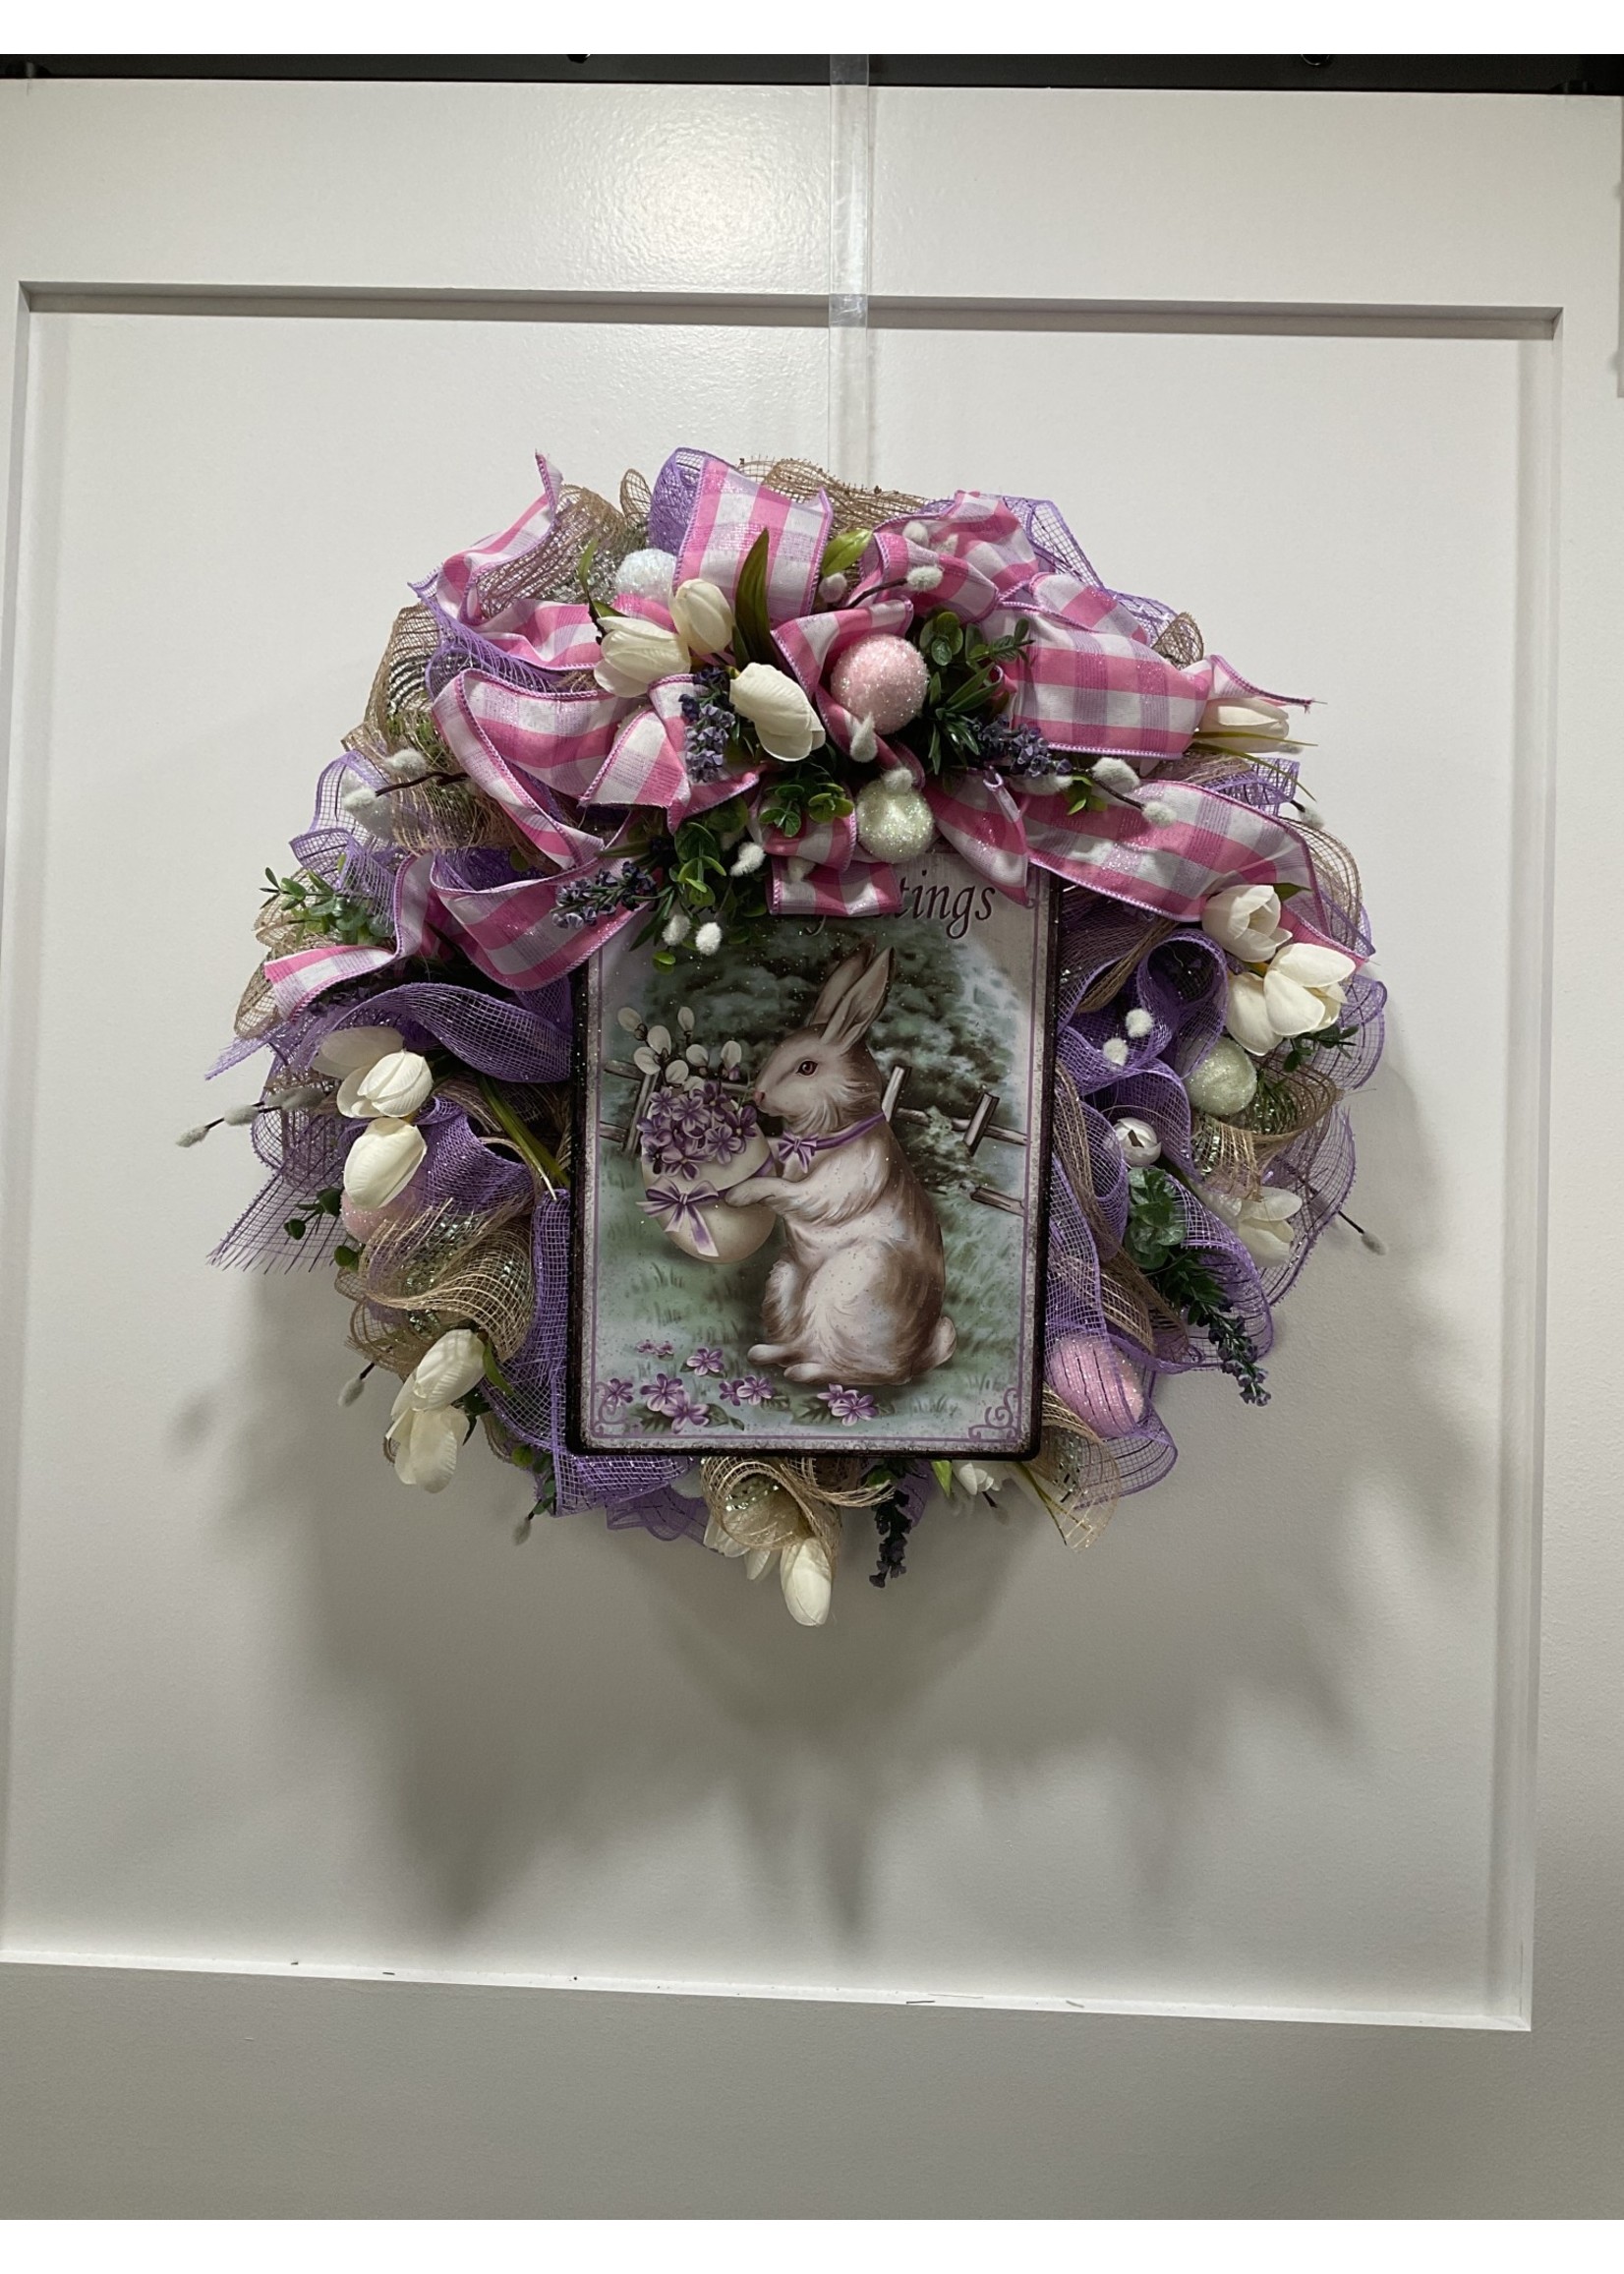 My New Favorite Thing 388 Wreath Mesh 24 in-Purple Bunny "Easter Greetings" w/White Tulips and Pink Check Ribbon